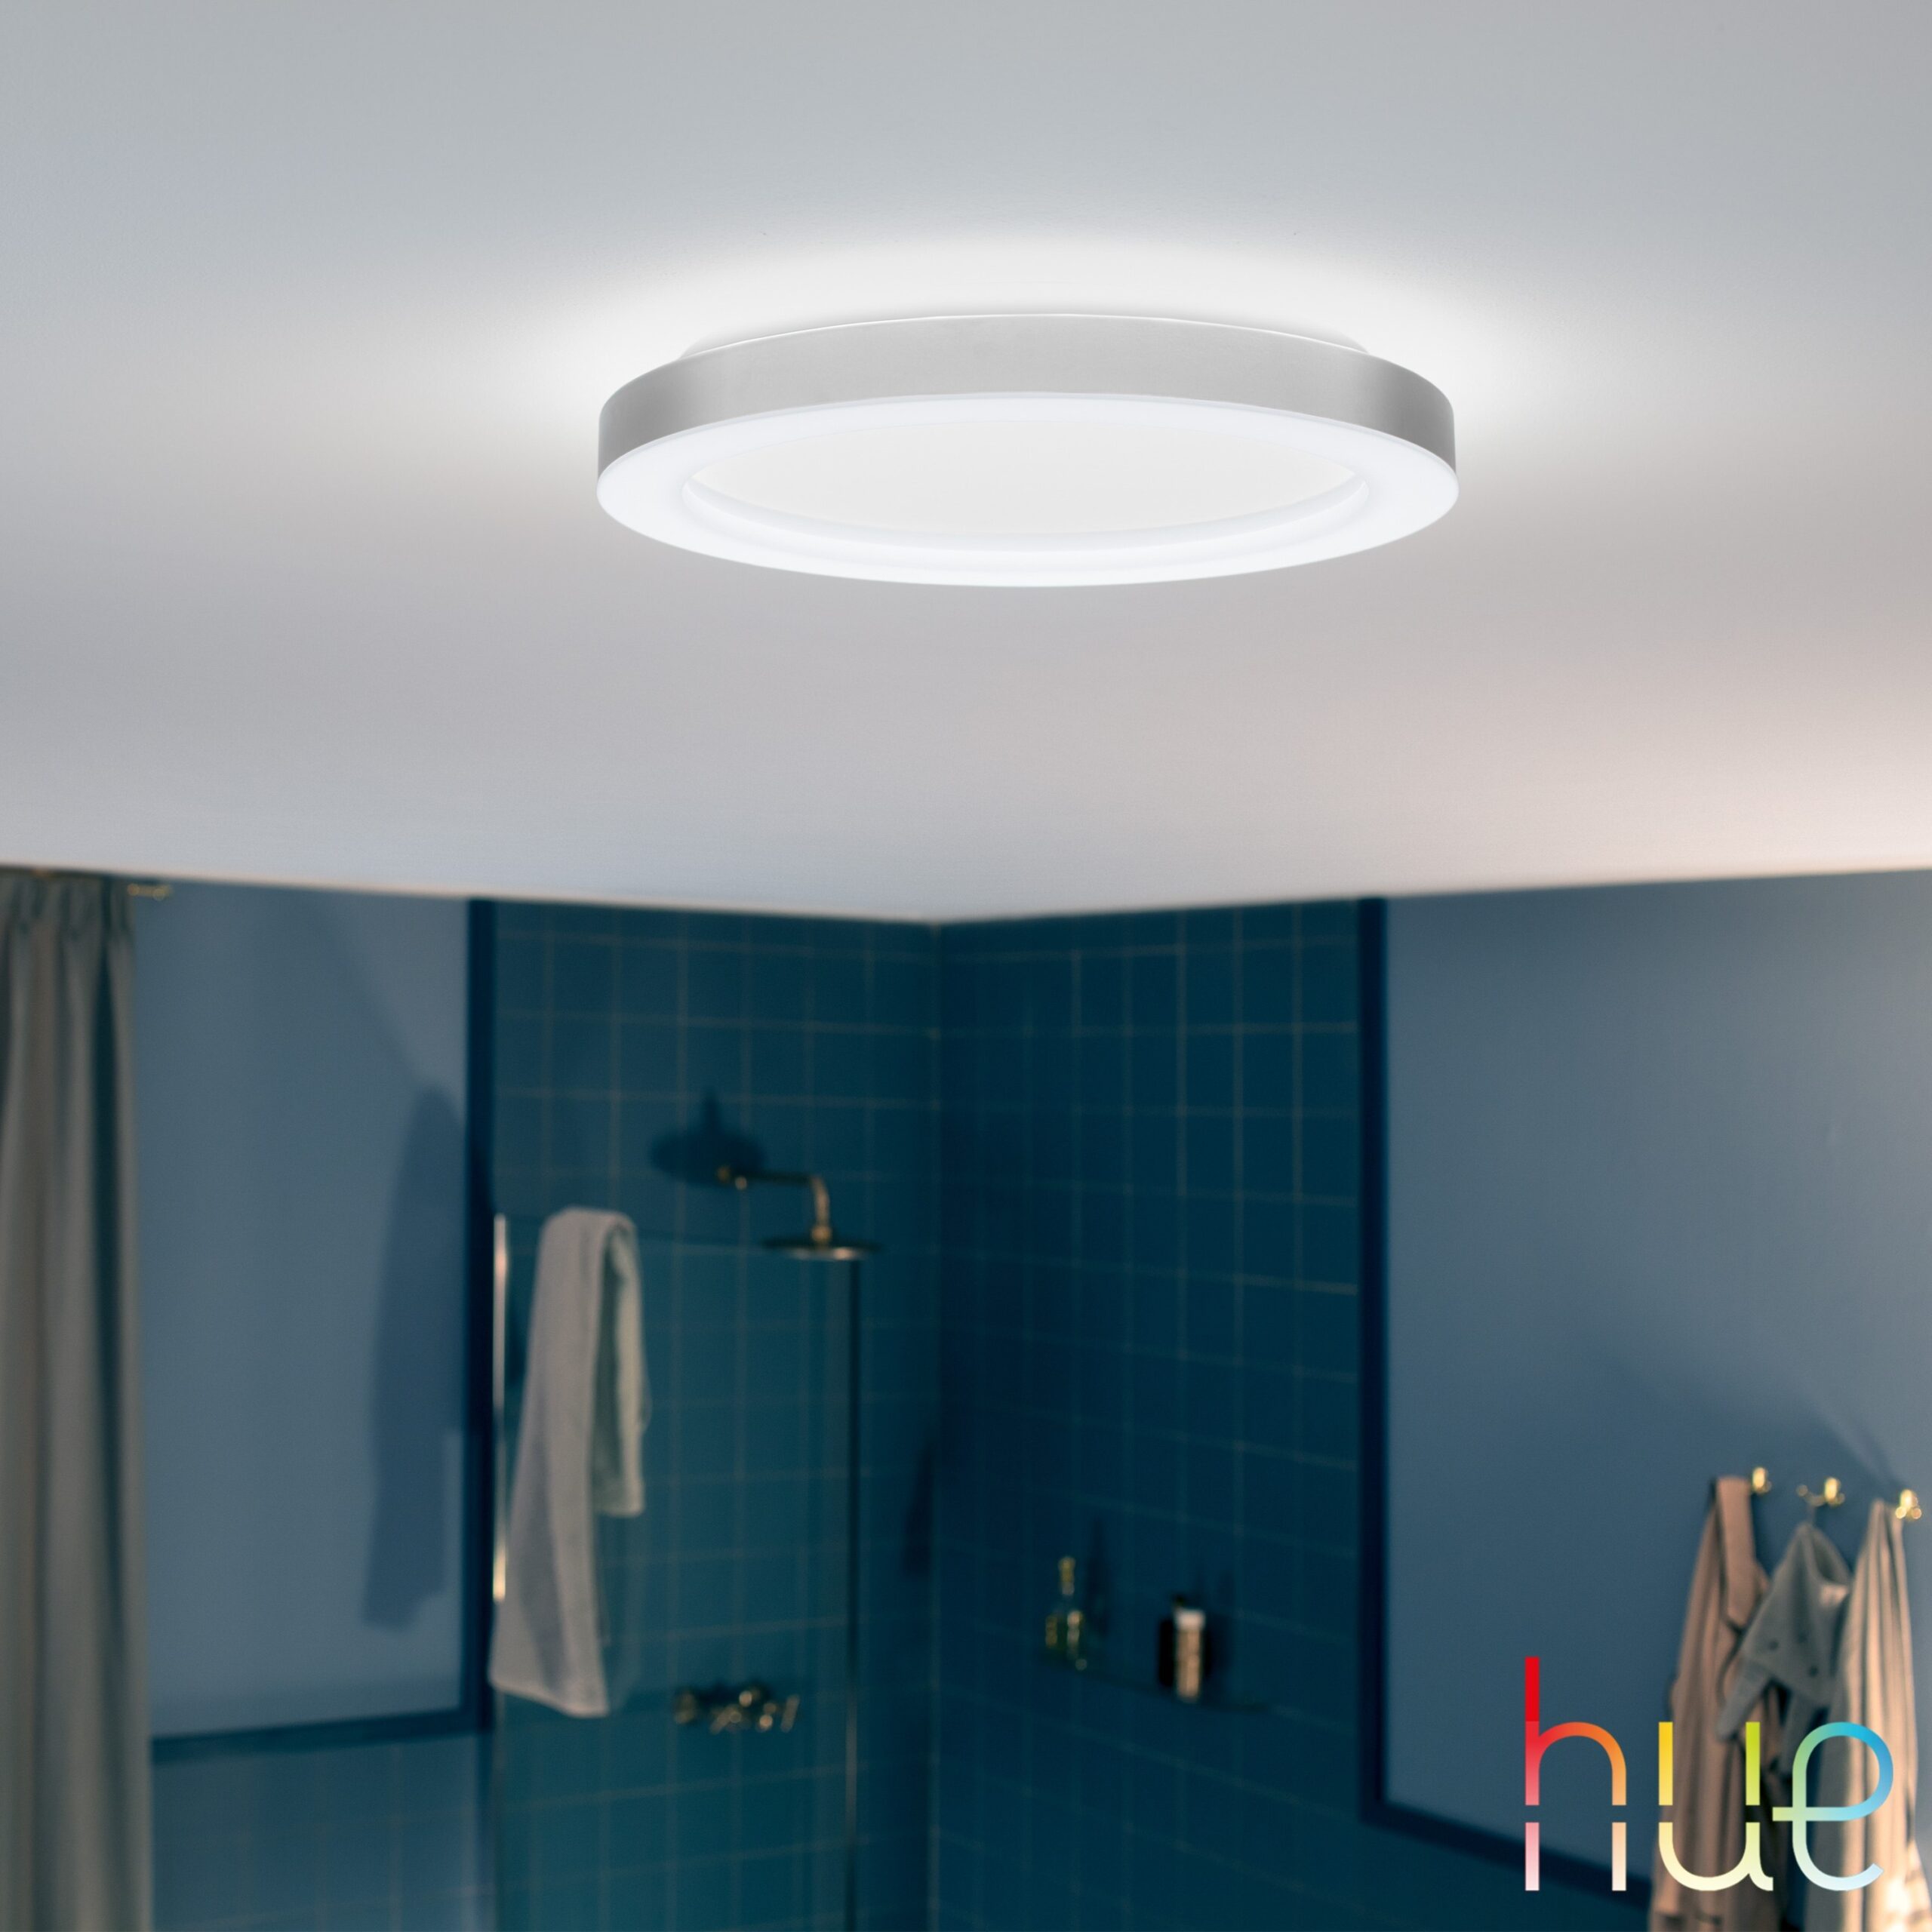 Philips Hue White Ambiance Adore Led Deckenleuchte Mit Dimmer inside Philips Hue Badezimmer Lampe